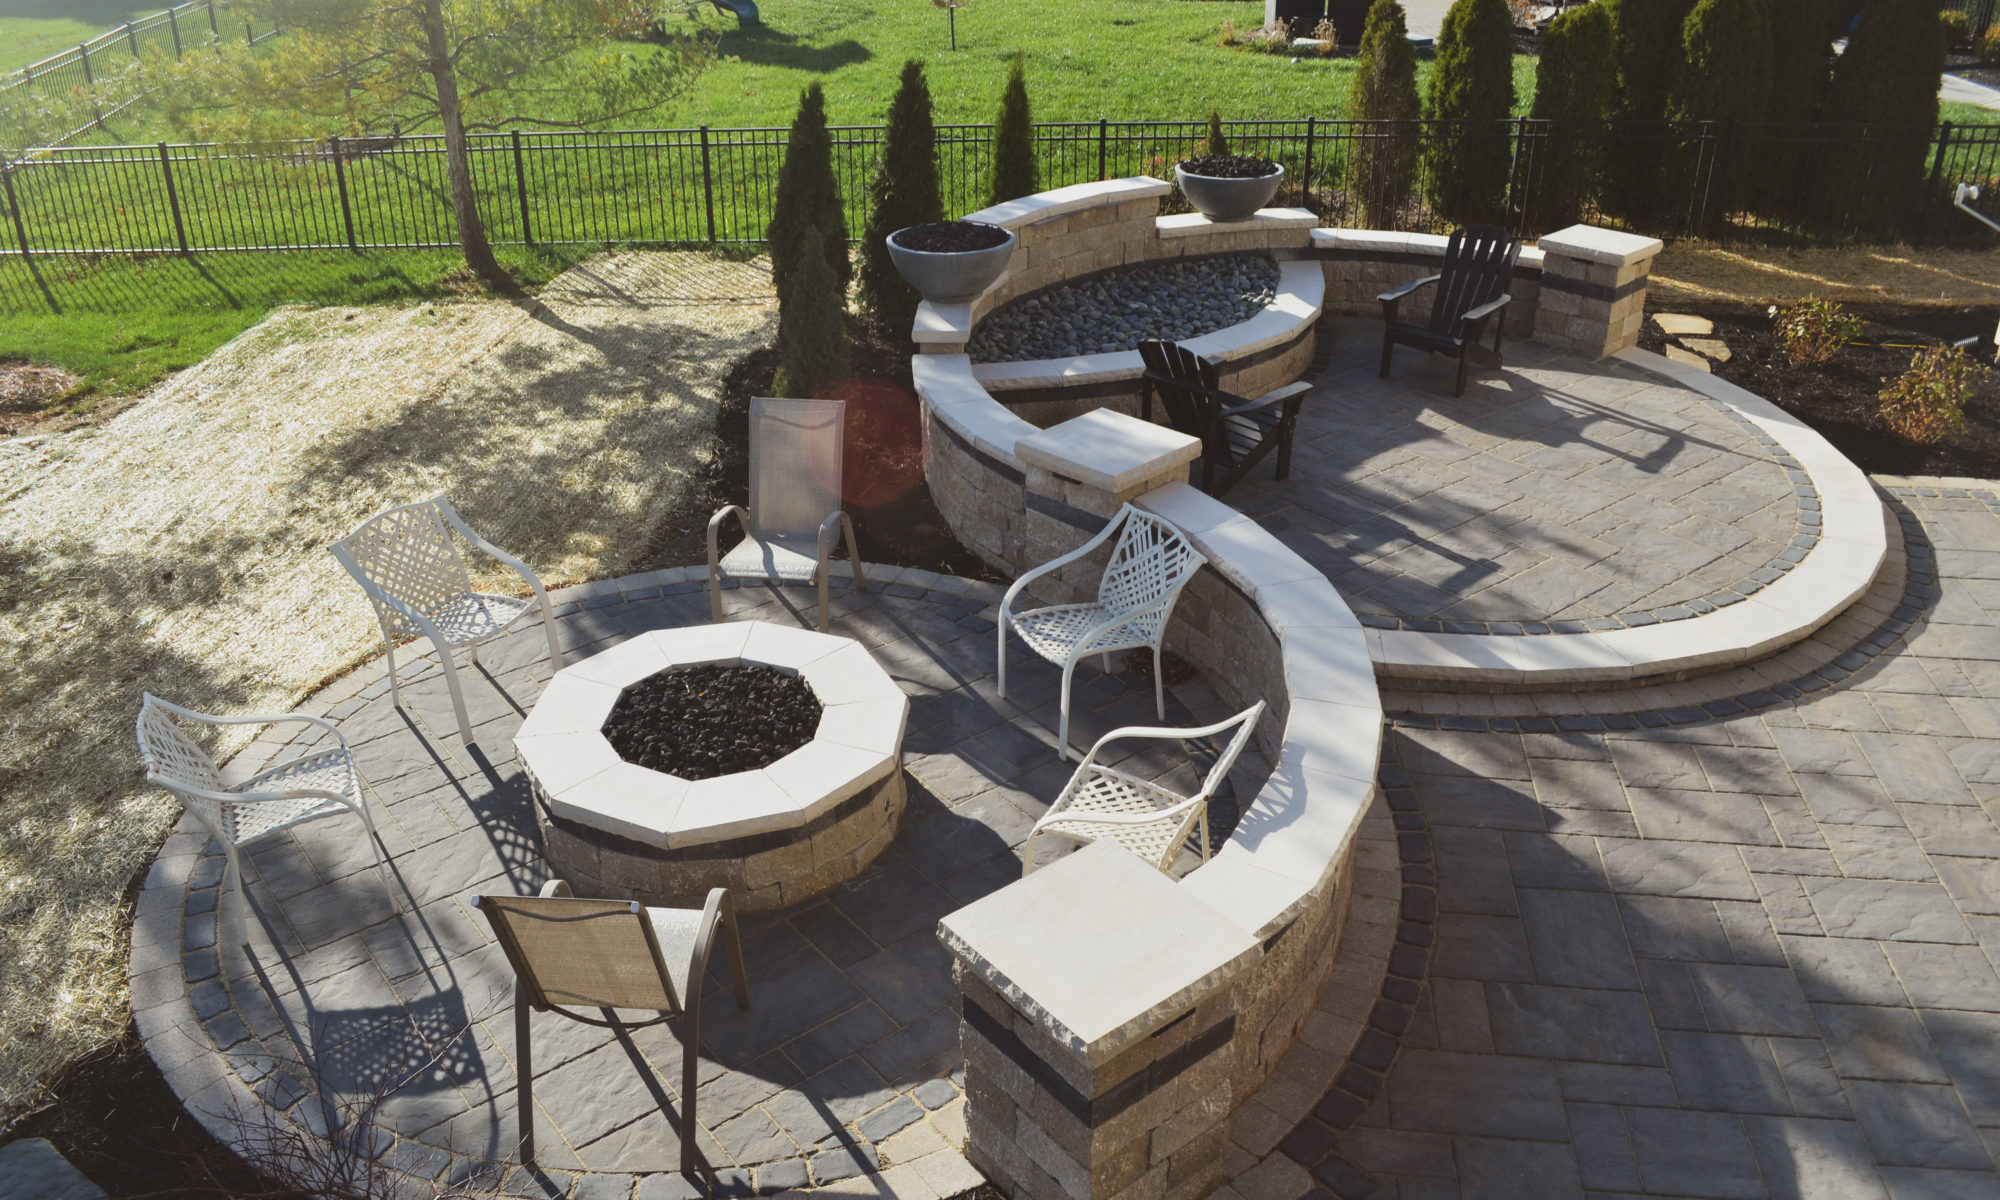 Precision Outdoor Curves of Fire gas firepit water feature two gas fire bowls unlock paver patio beacon hill flagstone alpine grey custom landscaping Noblesville indiana